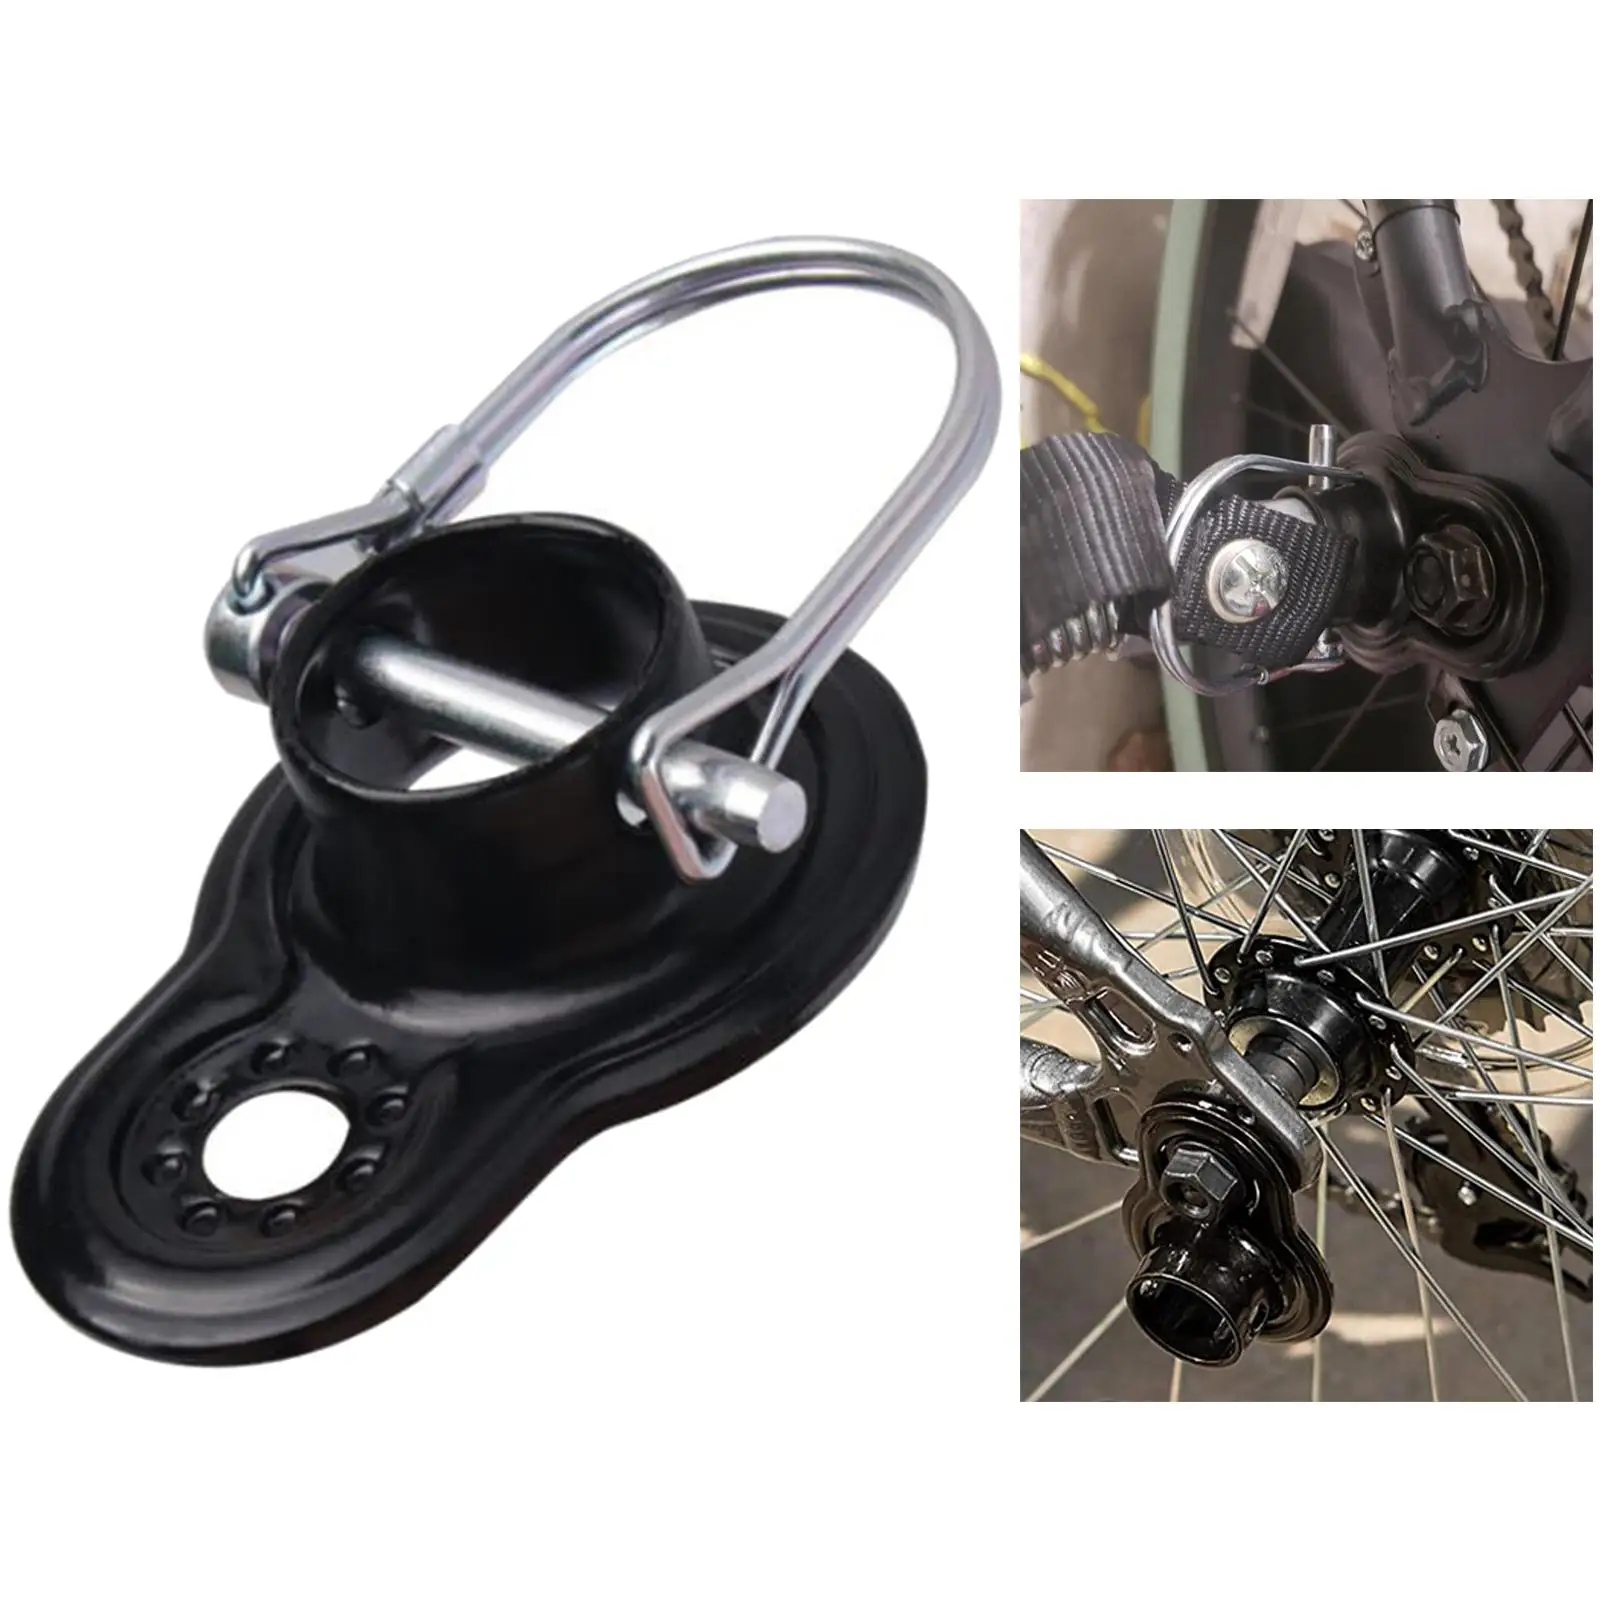 Bike Trailer Coupler Hitch Attachment for Instep Child Seats Bicycle Trailer